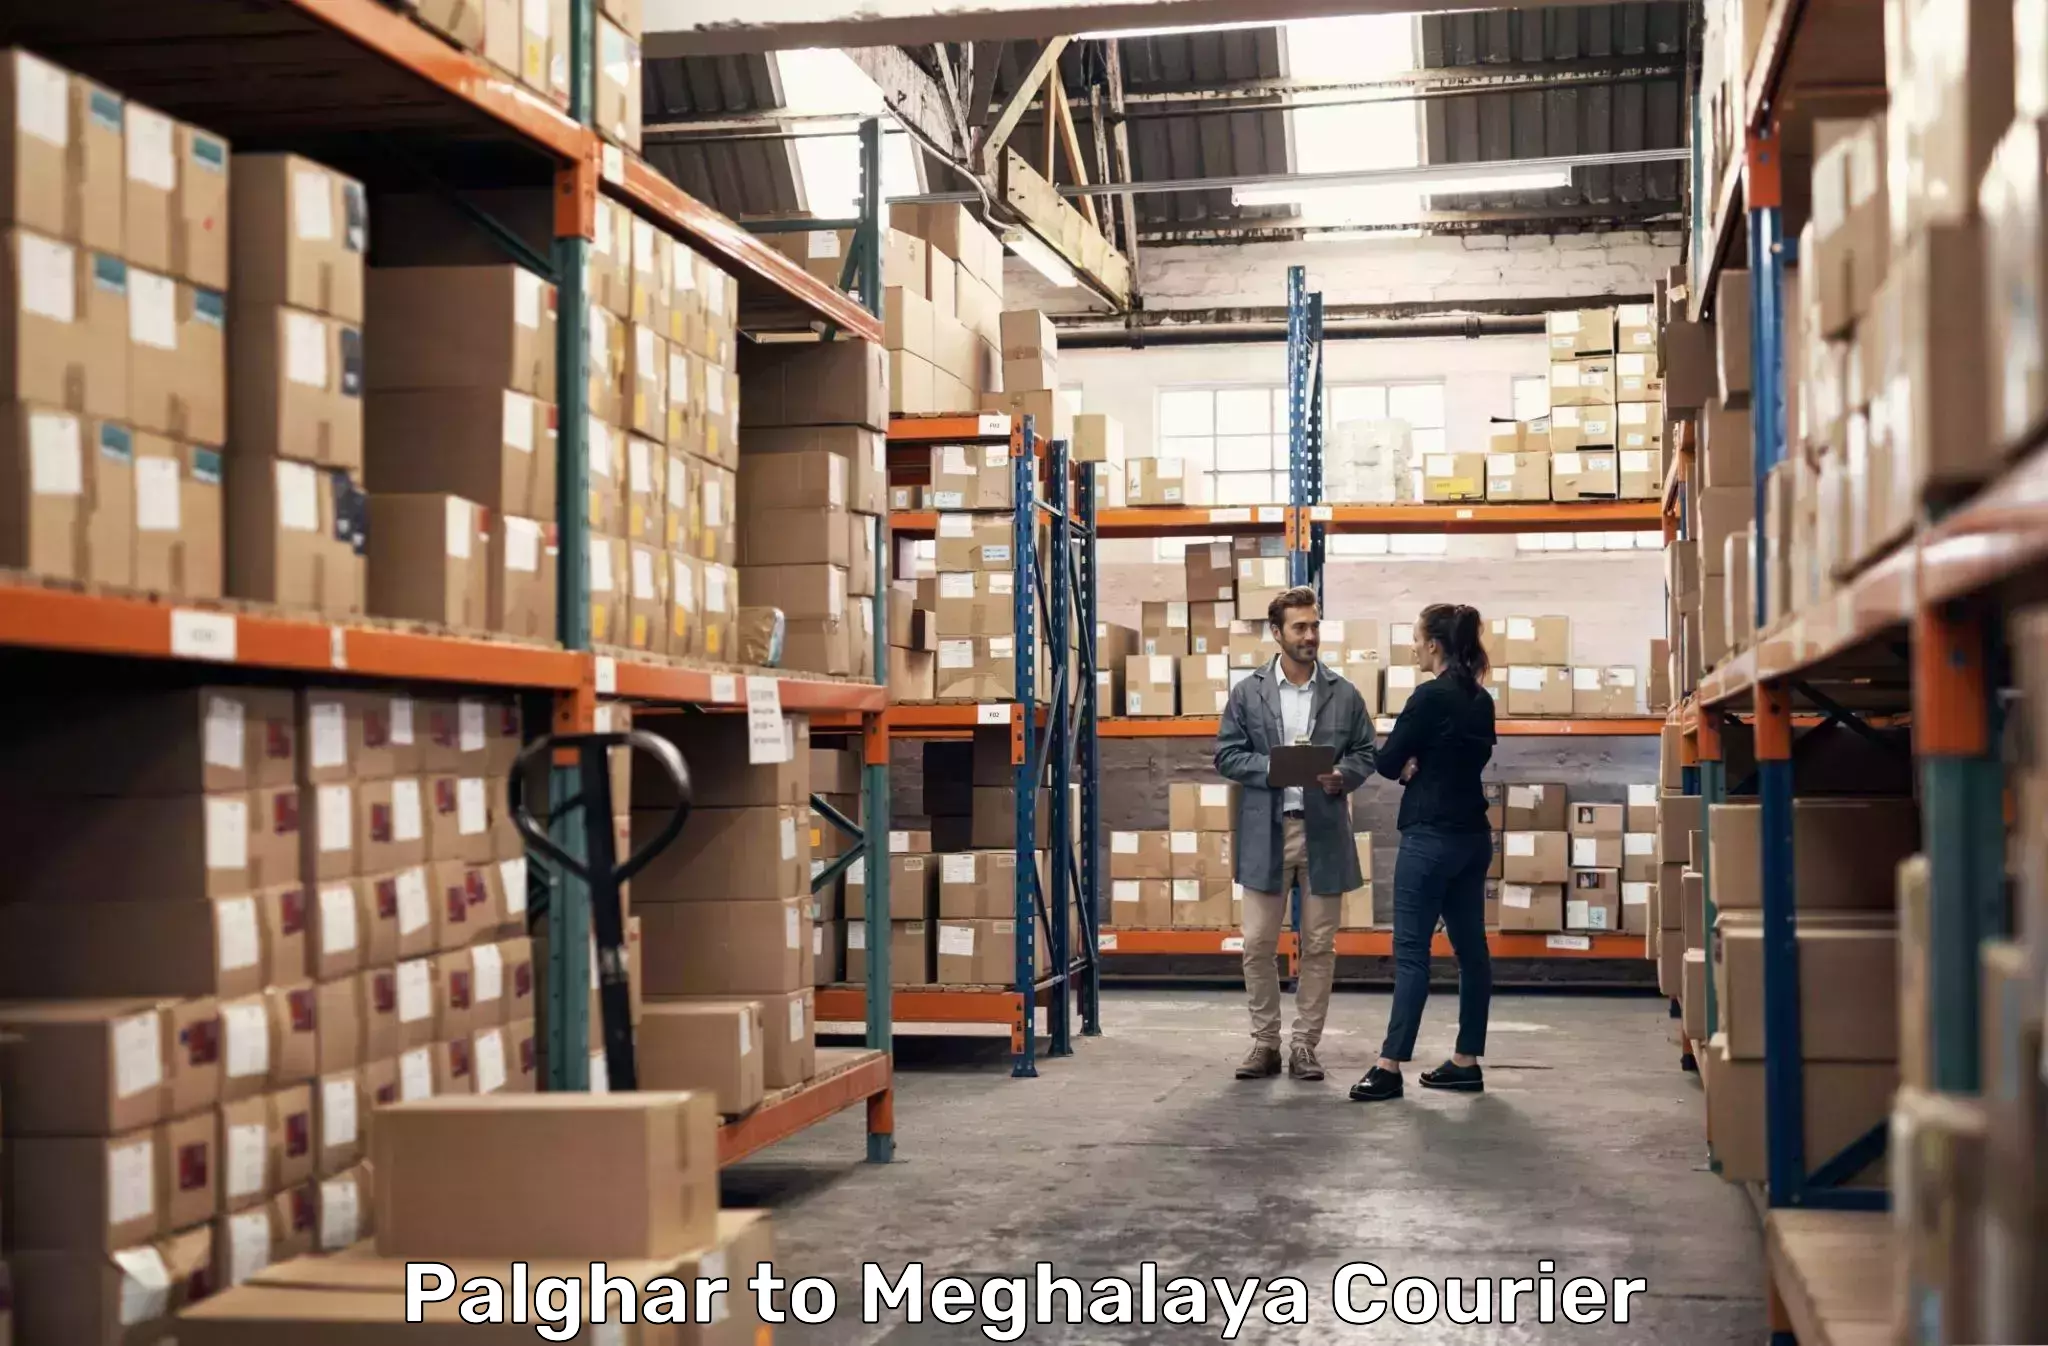 Local delivery service Palghar to Umsaw